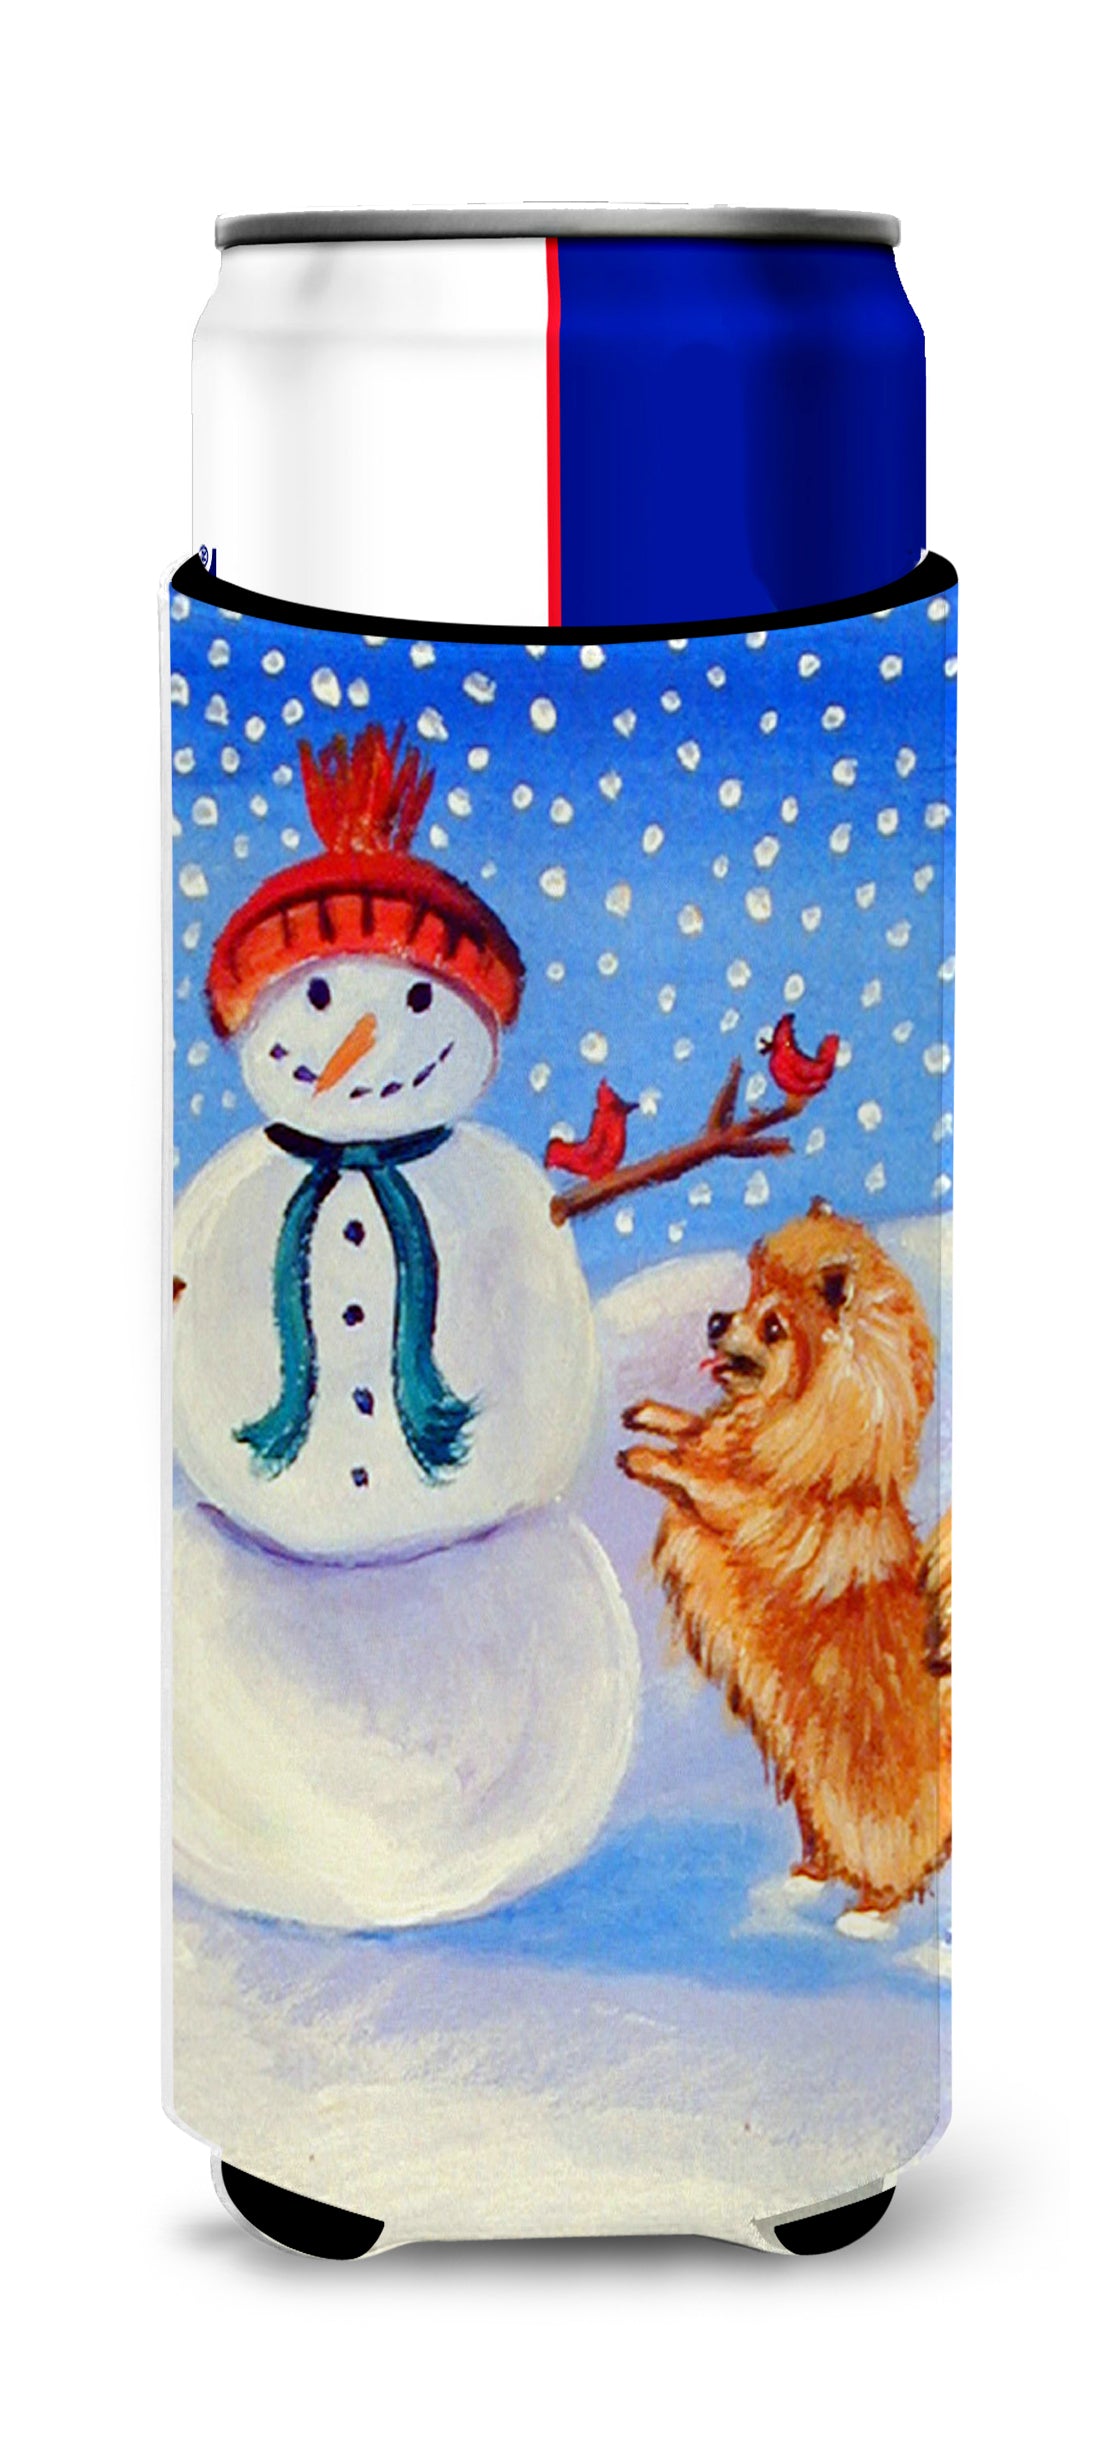 Snowman with Pomeranian Winter Snowman Ultra Beverage Insulators for slim cans 7151MUK.